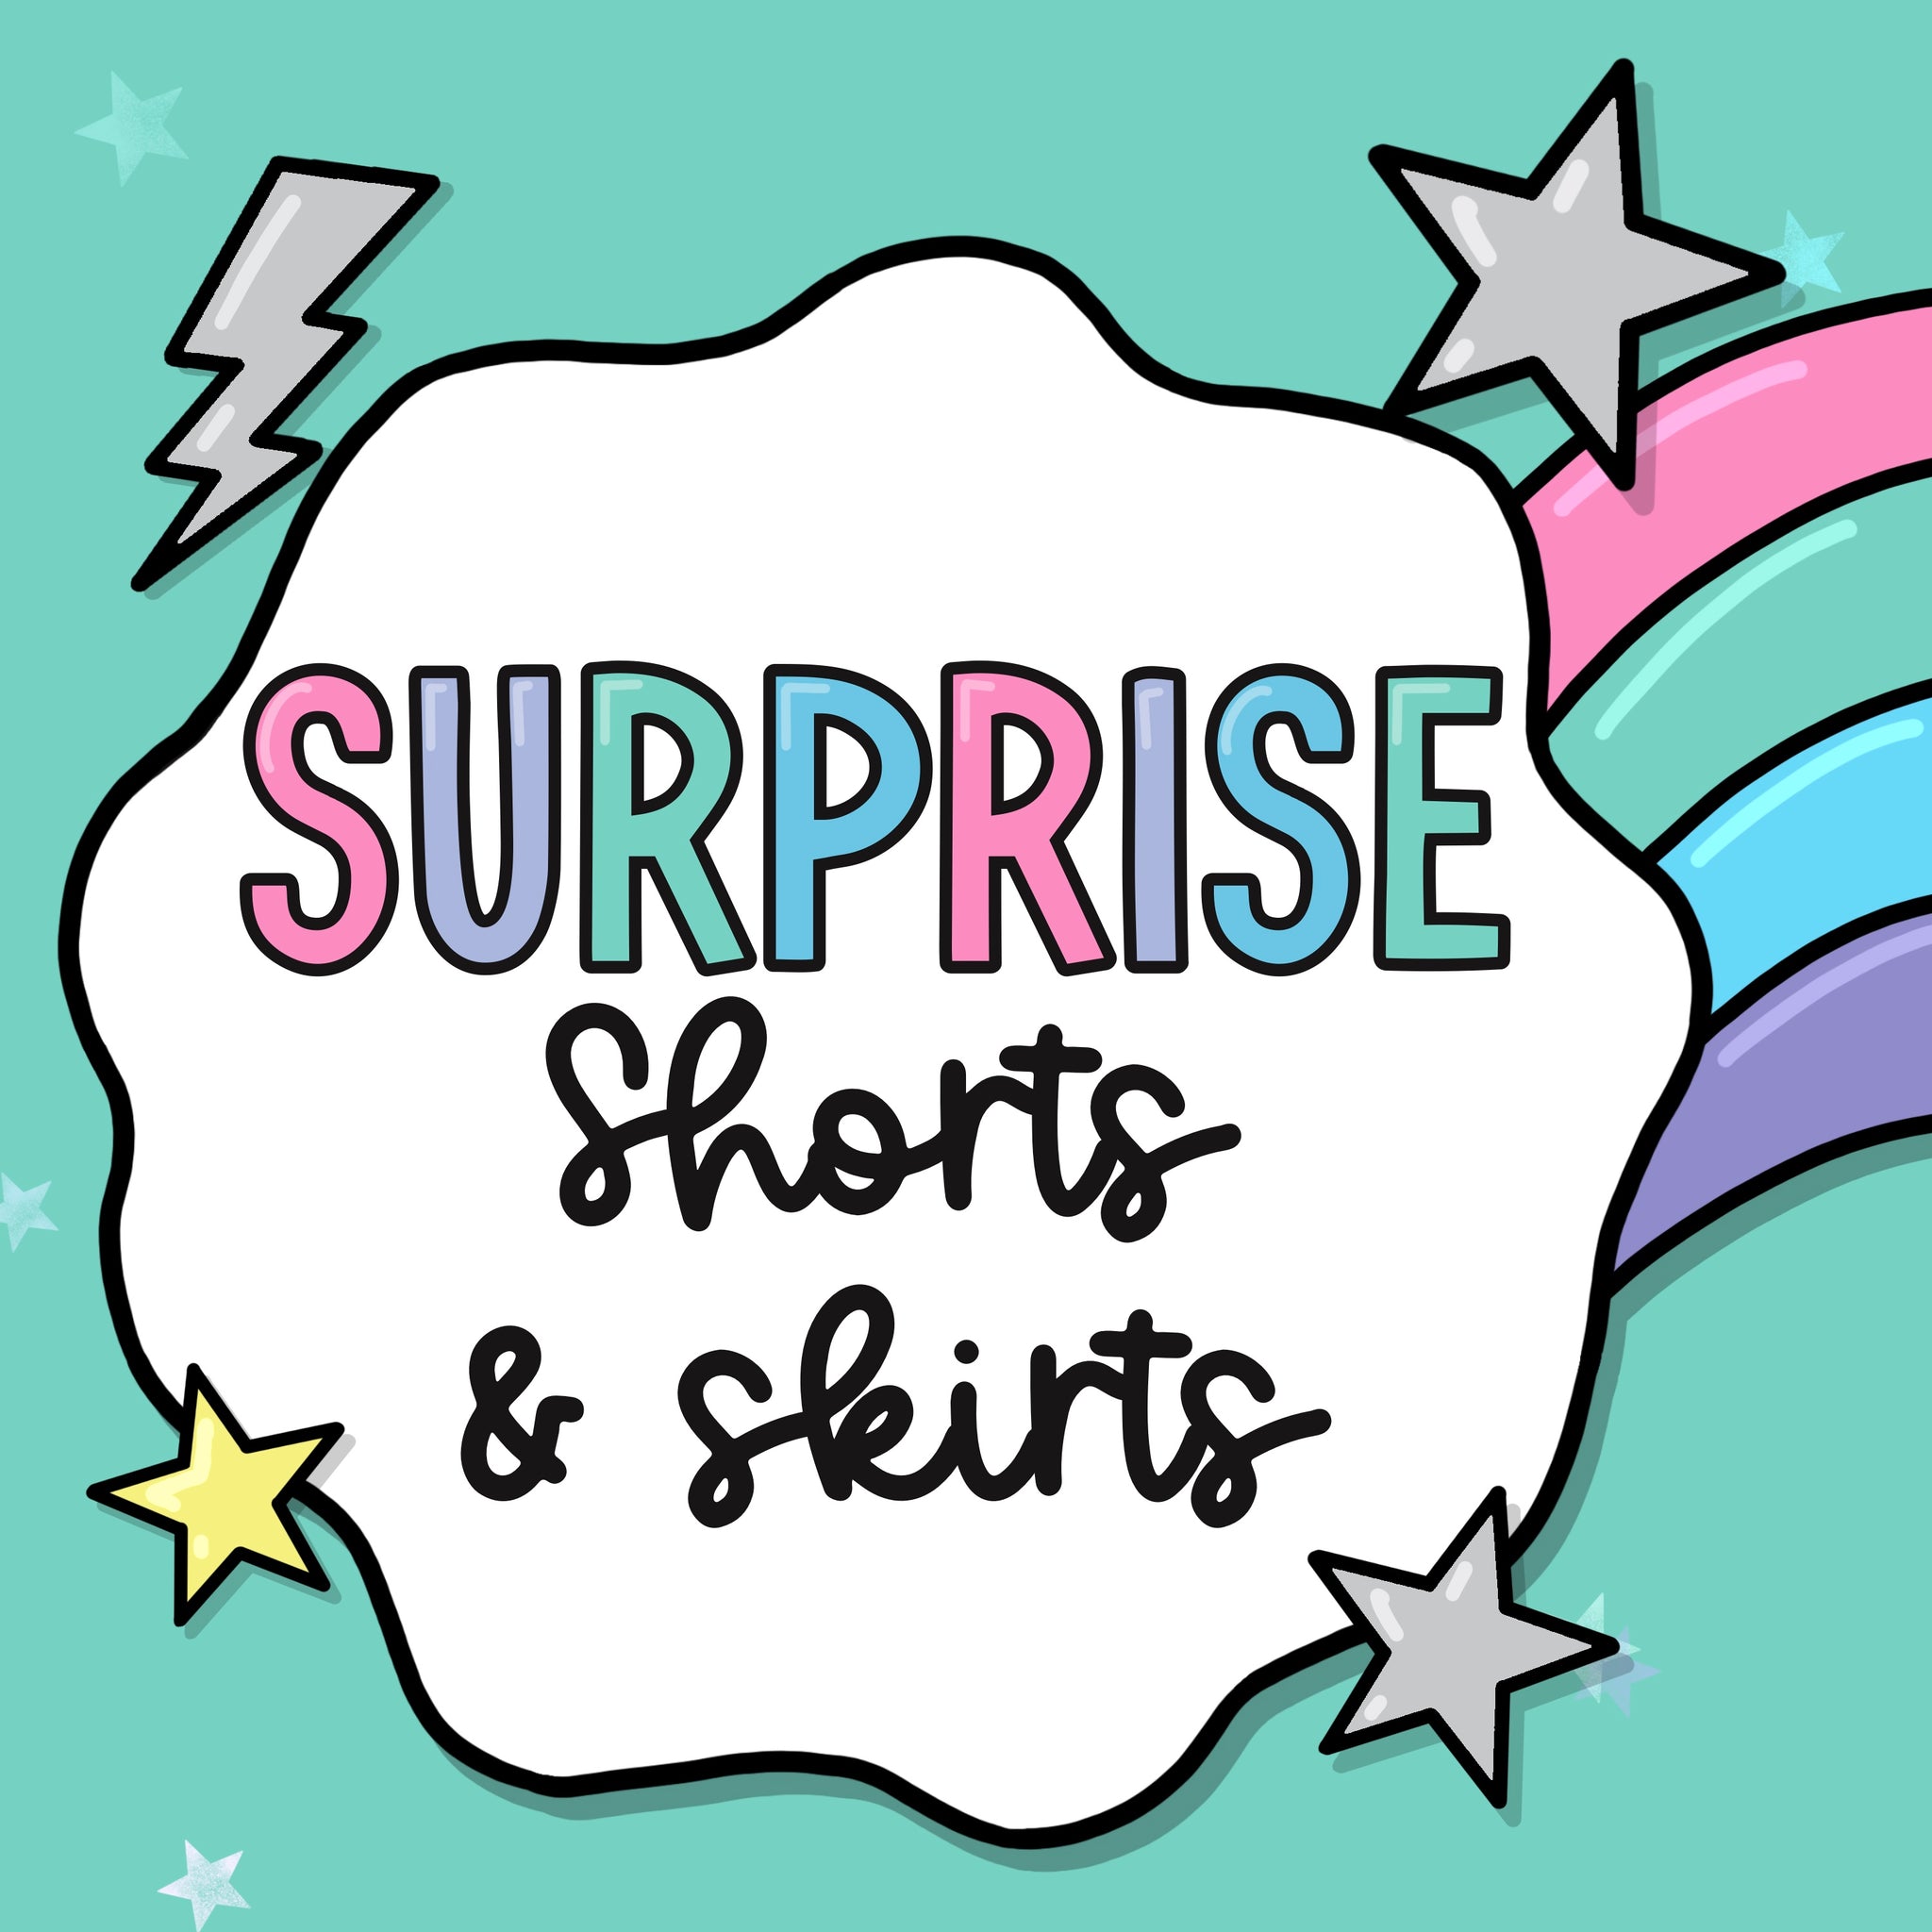 Surprise Shorts or Skirts